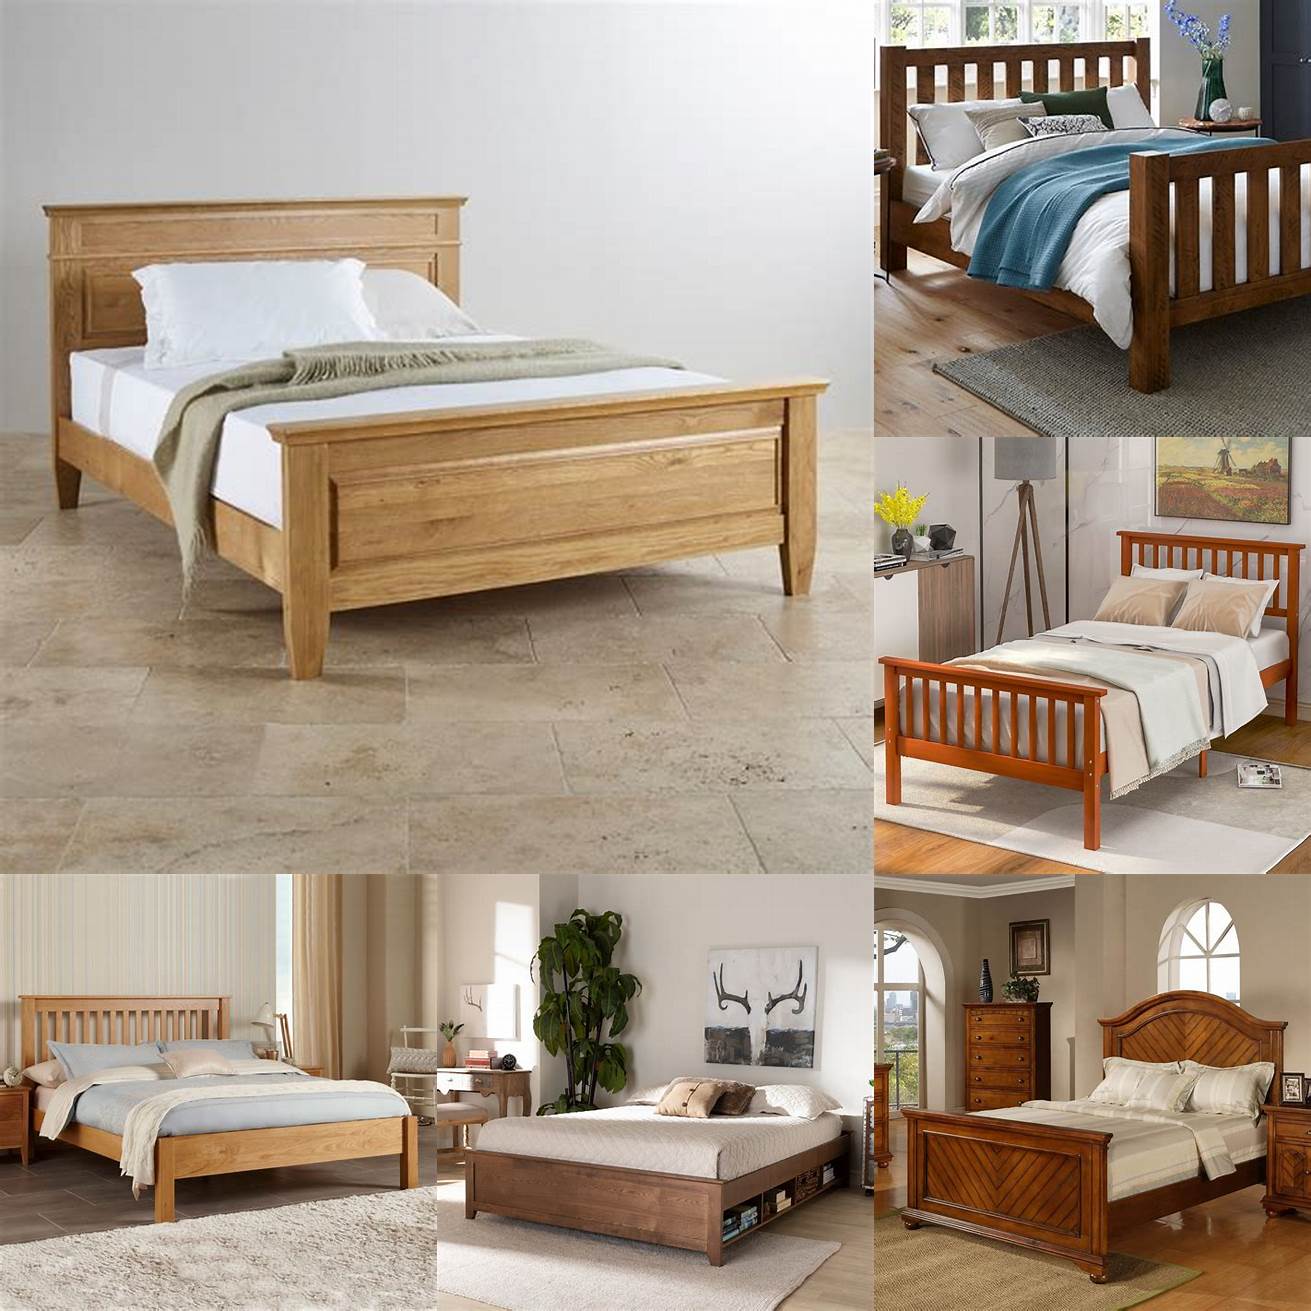 A wooden bed frame is classic and timeless